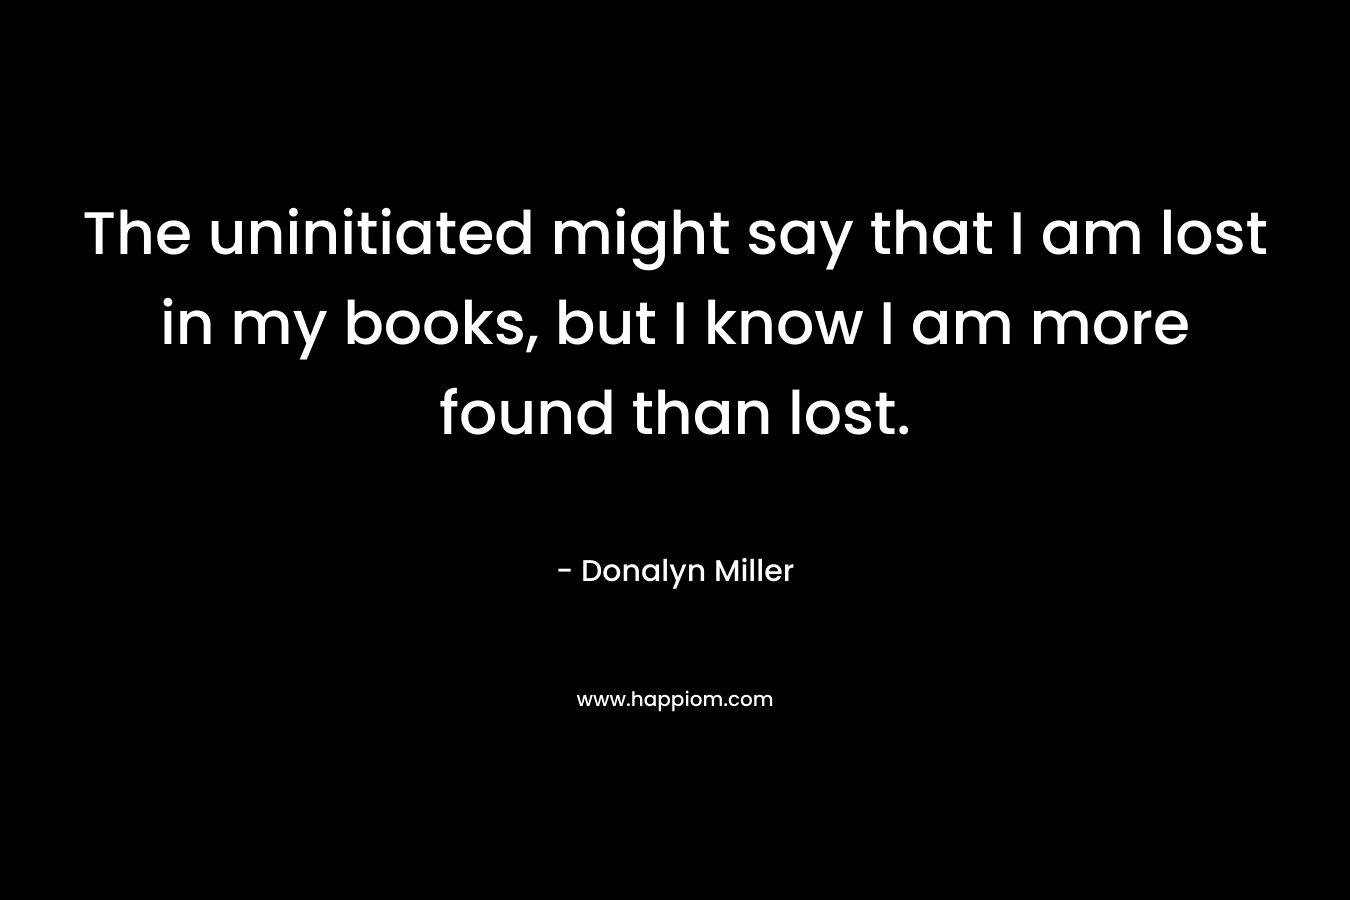 The uninitiated might say that I am lost in my books, but I know I am more found than lost.